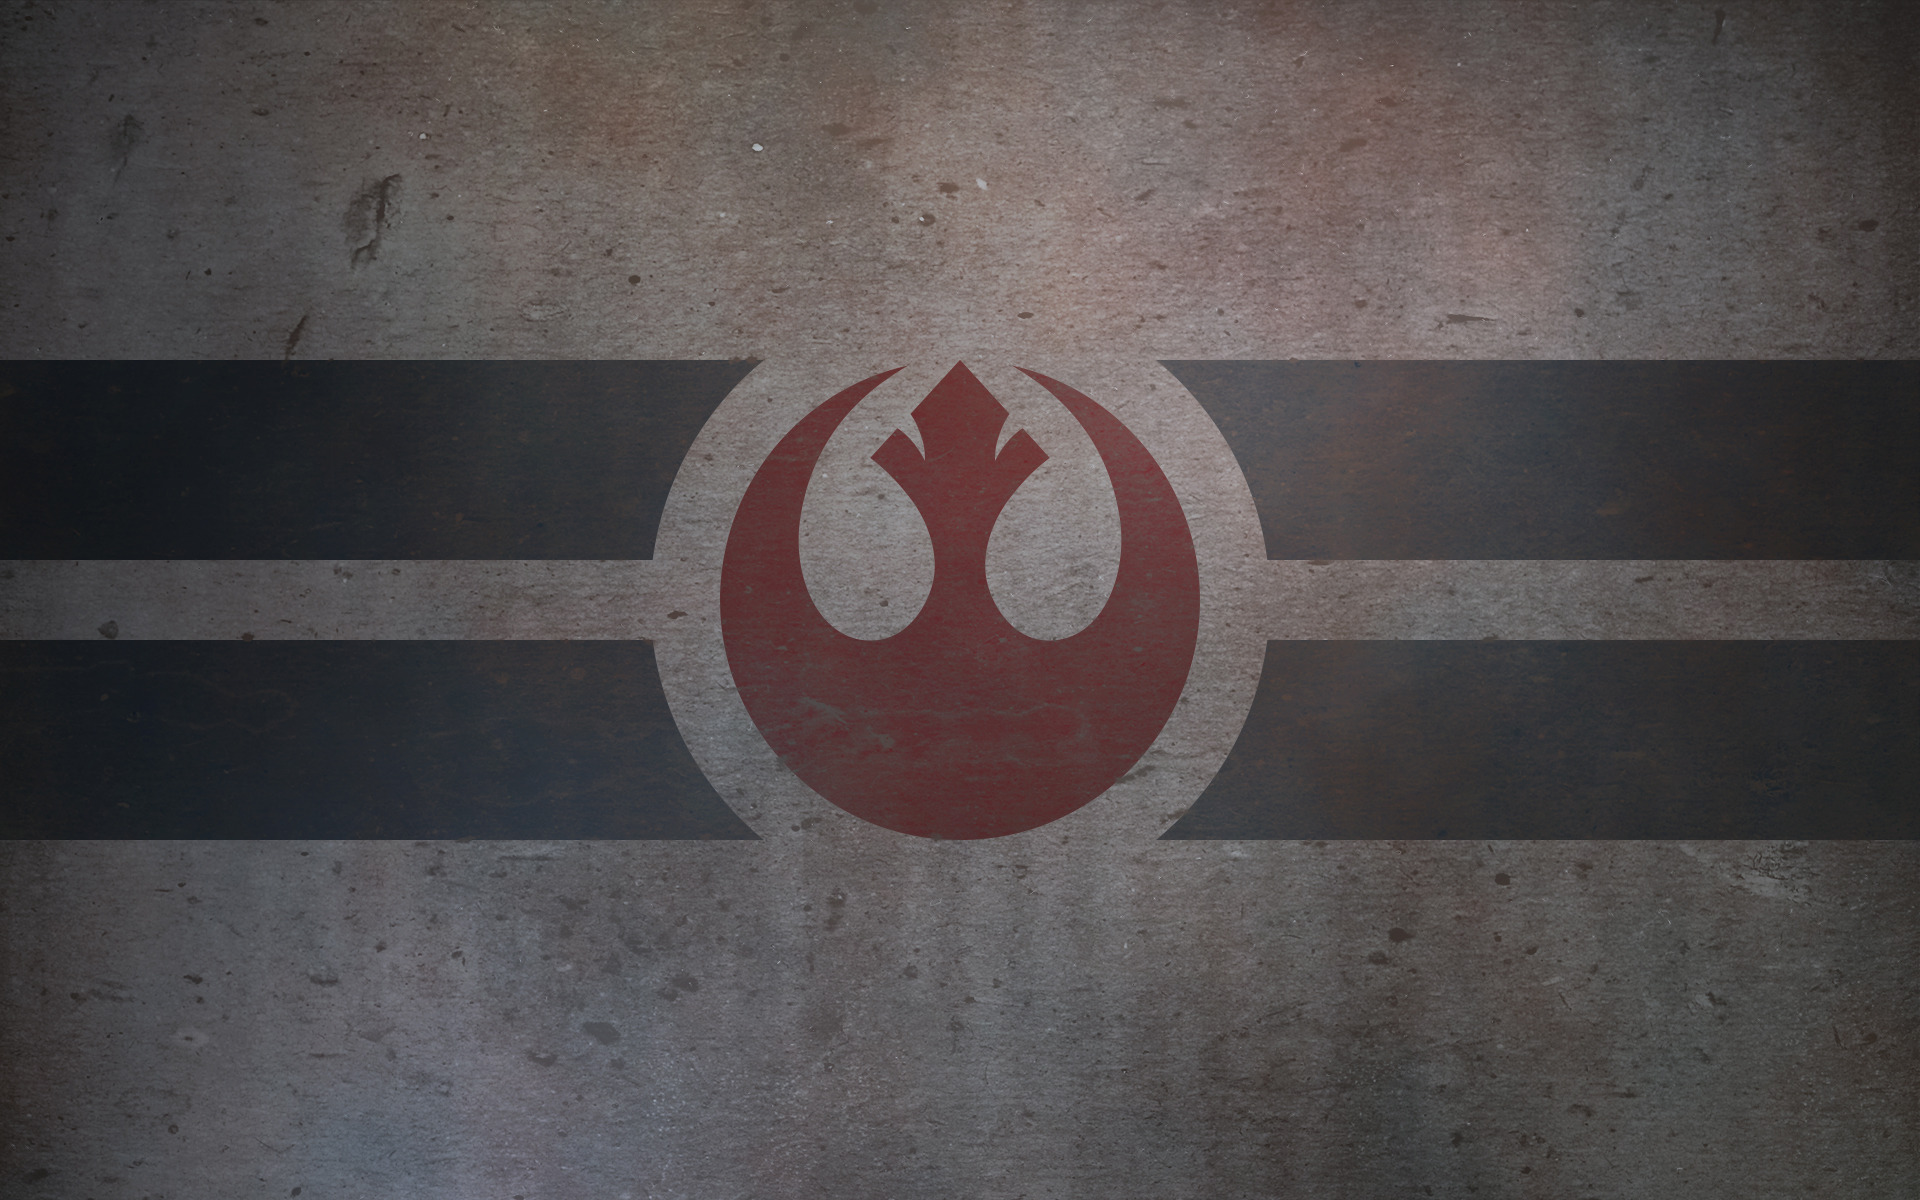 Wallpapers Stars And Stripes Texture Logos Star Wars 1920x1200 ...